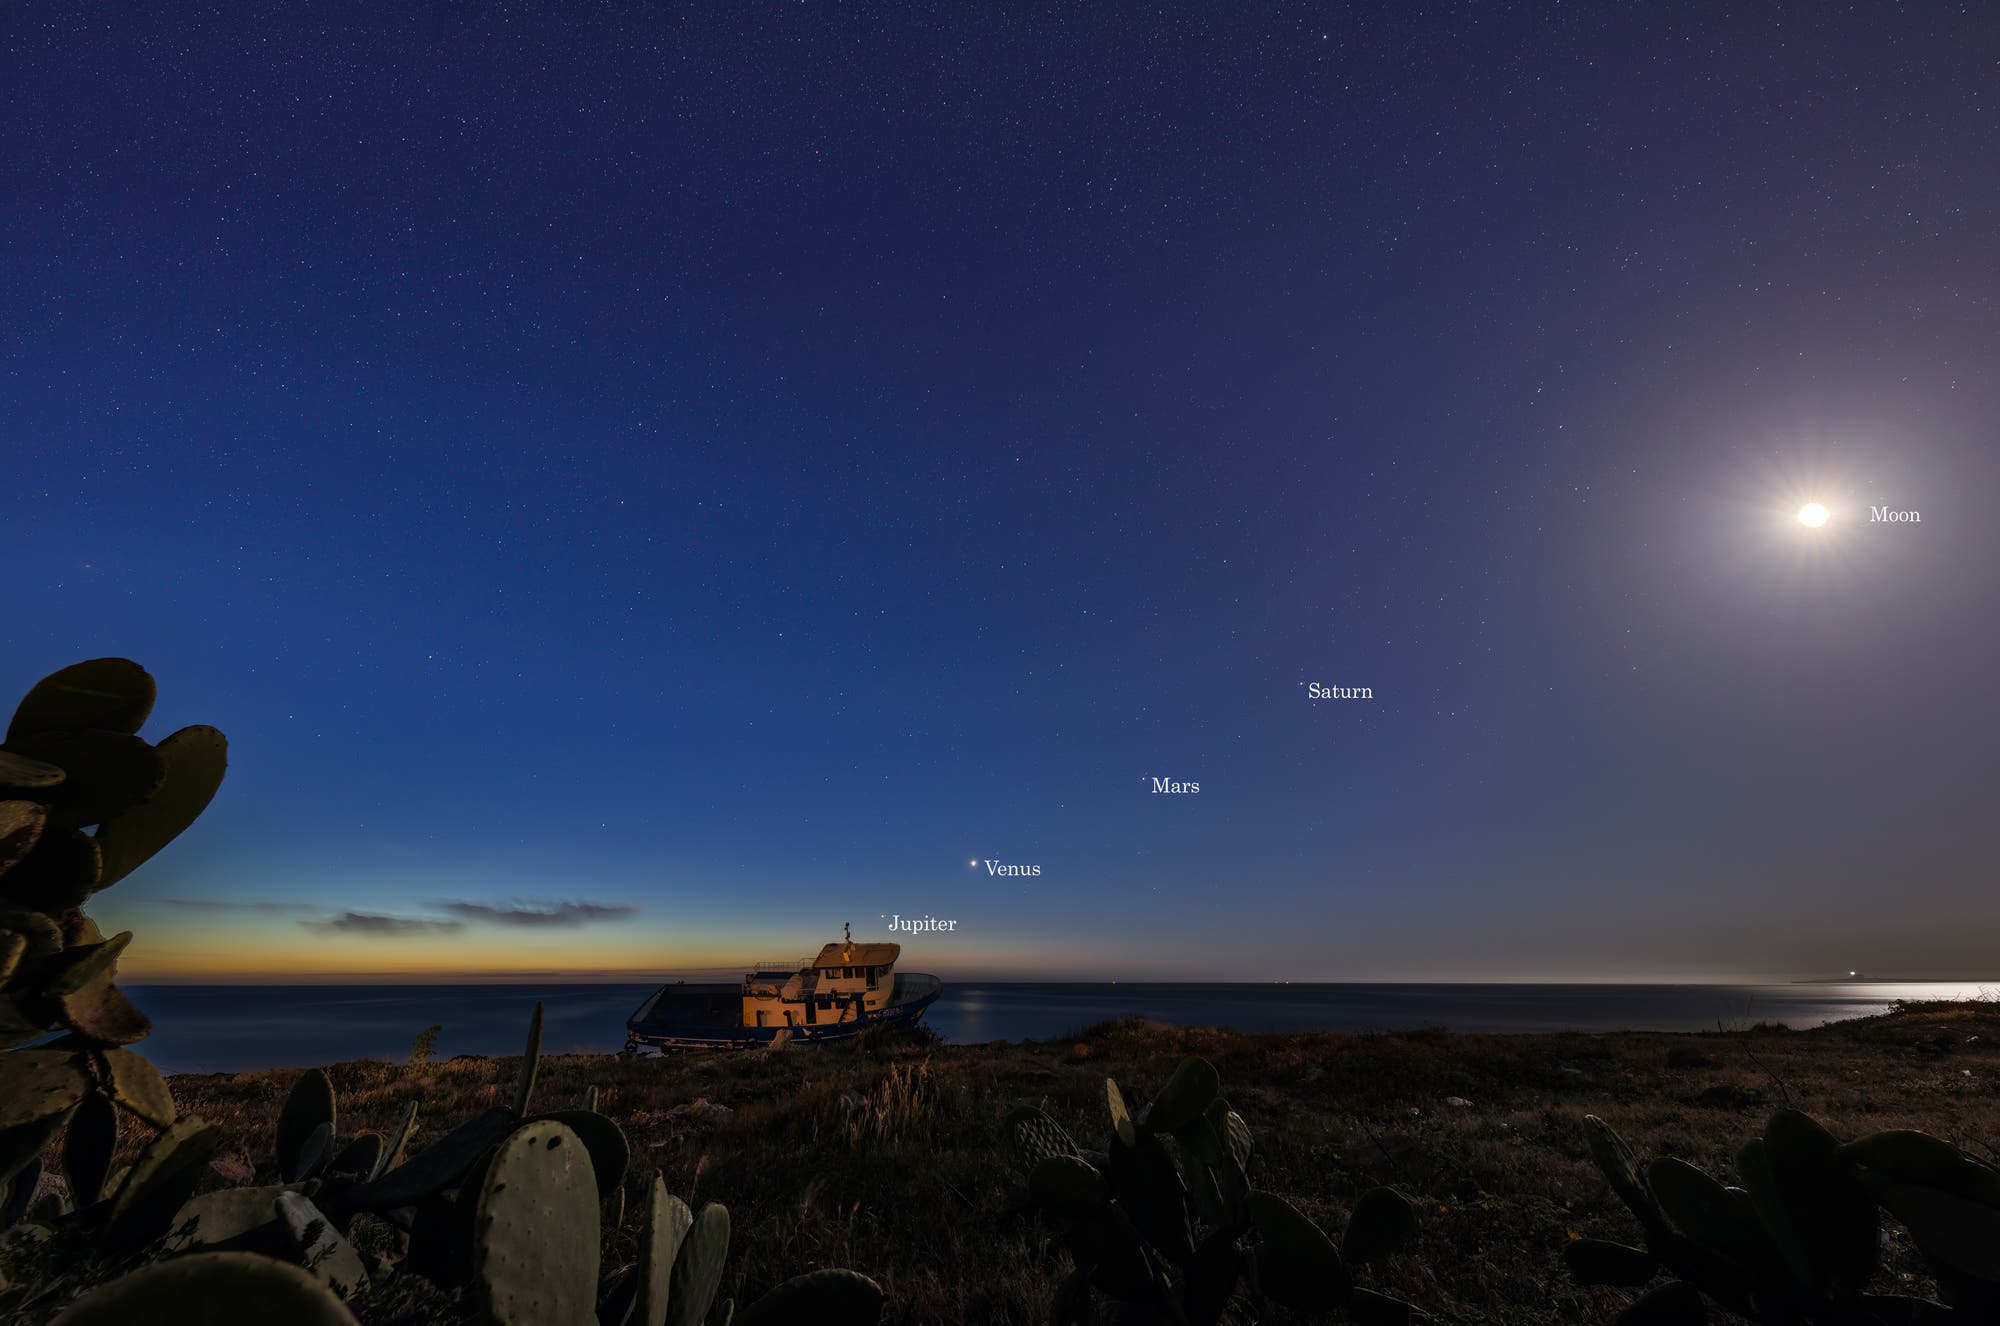 Four planets and the moon